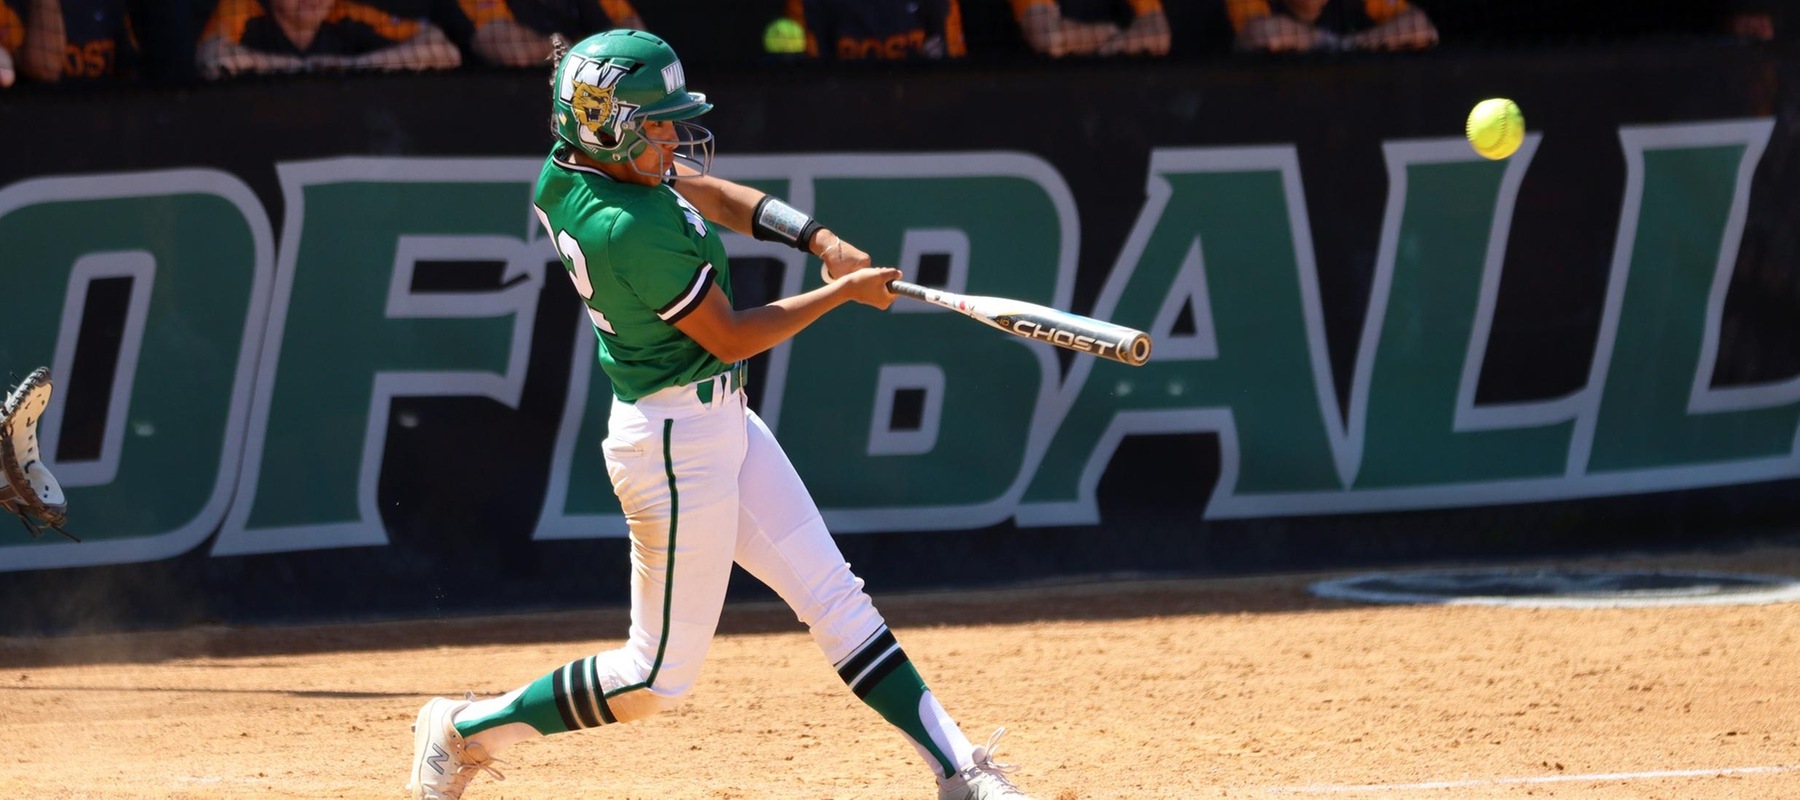 Photo of Gabbie Saucedo hitting a triple in game two against Post. Copyright 2022; Wilmington University. All rights reserved. Photo by Dan Lauletta. April 15, 2022 vs. Post.